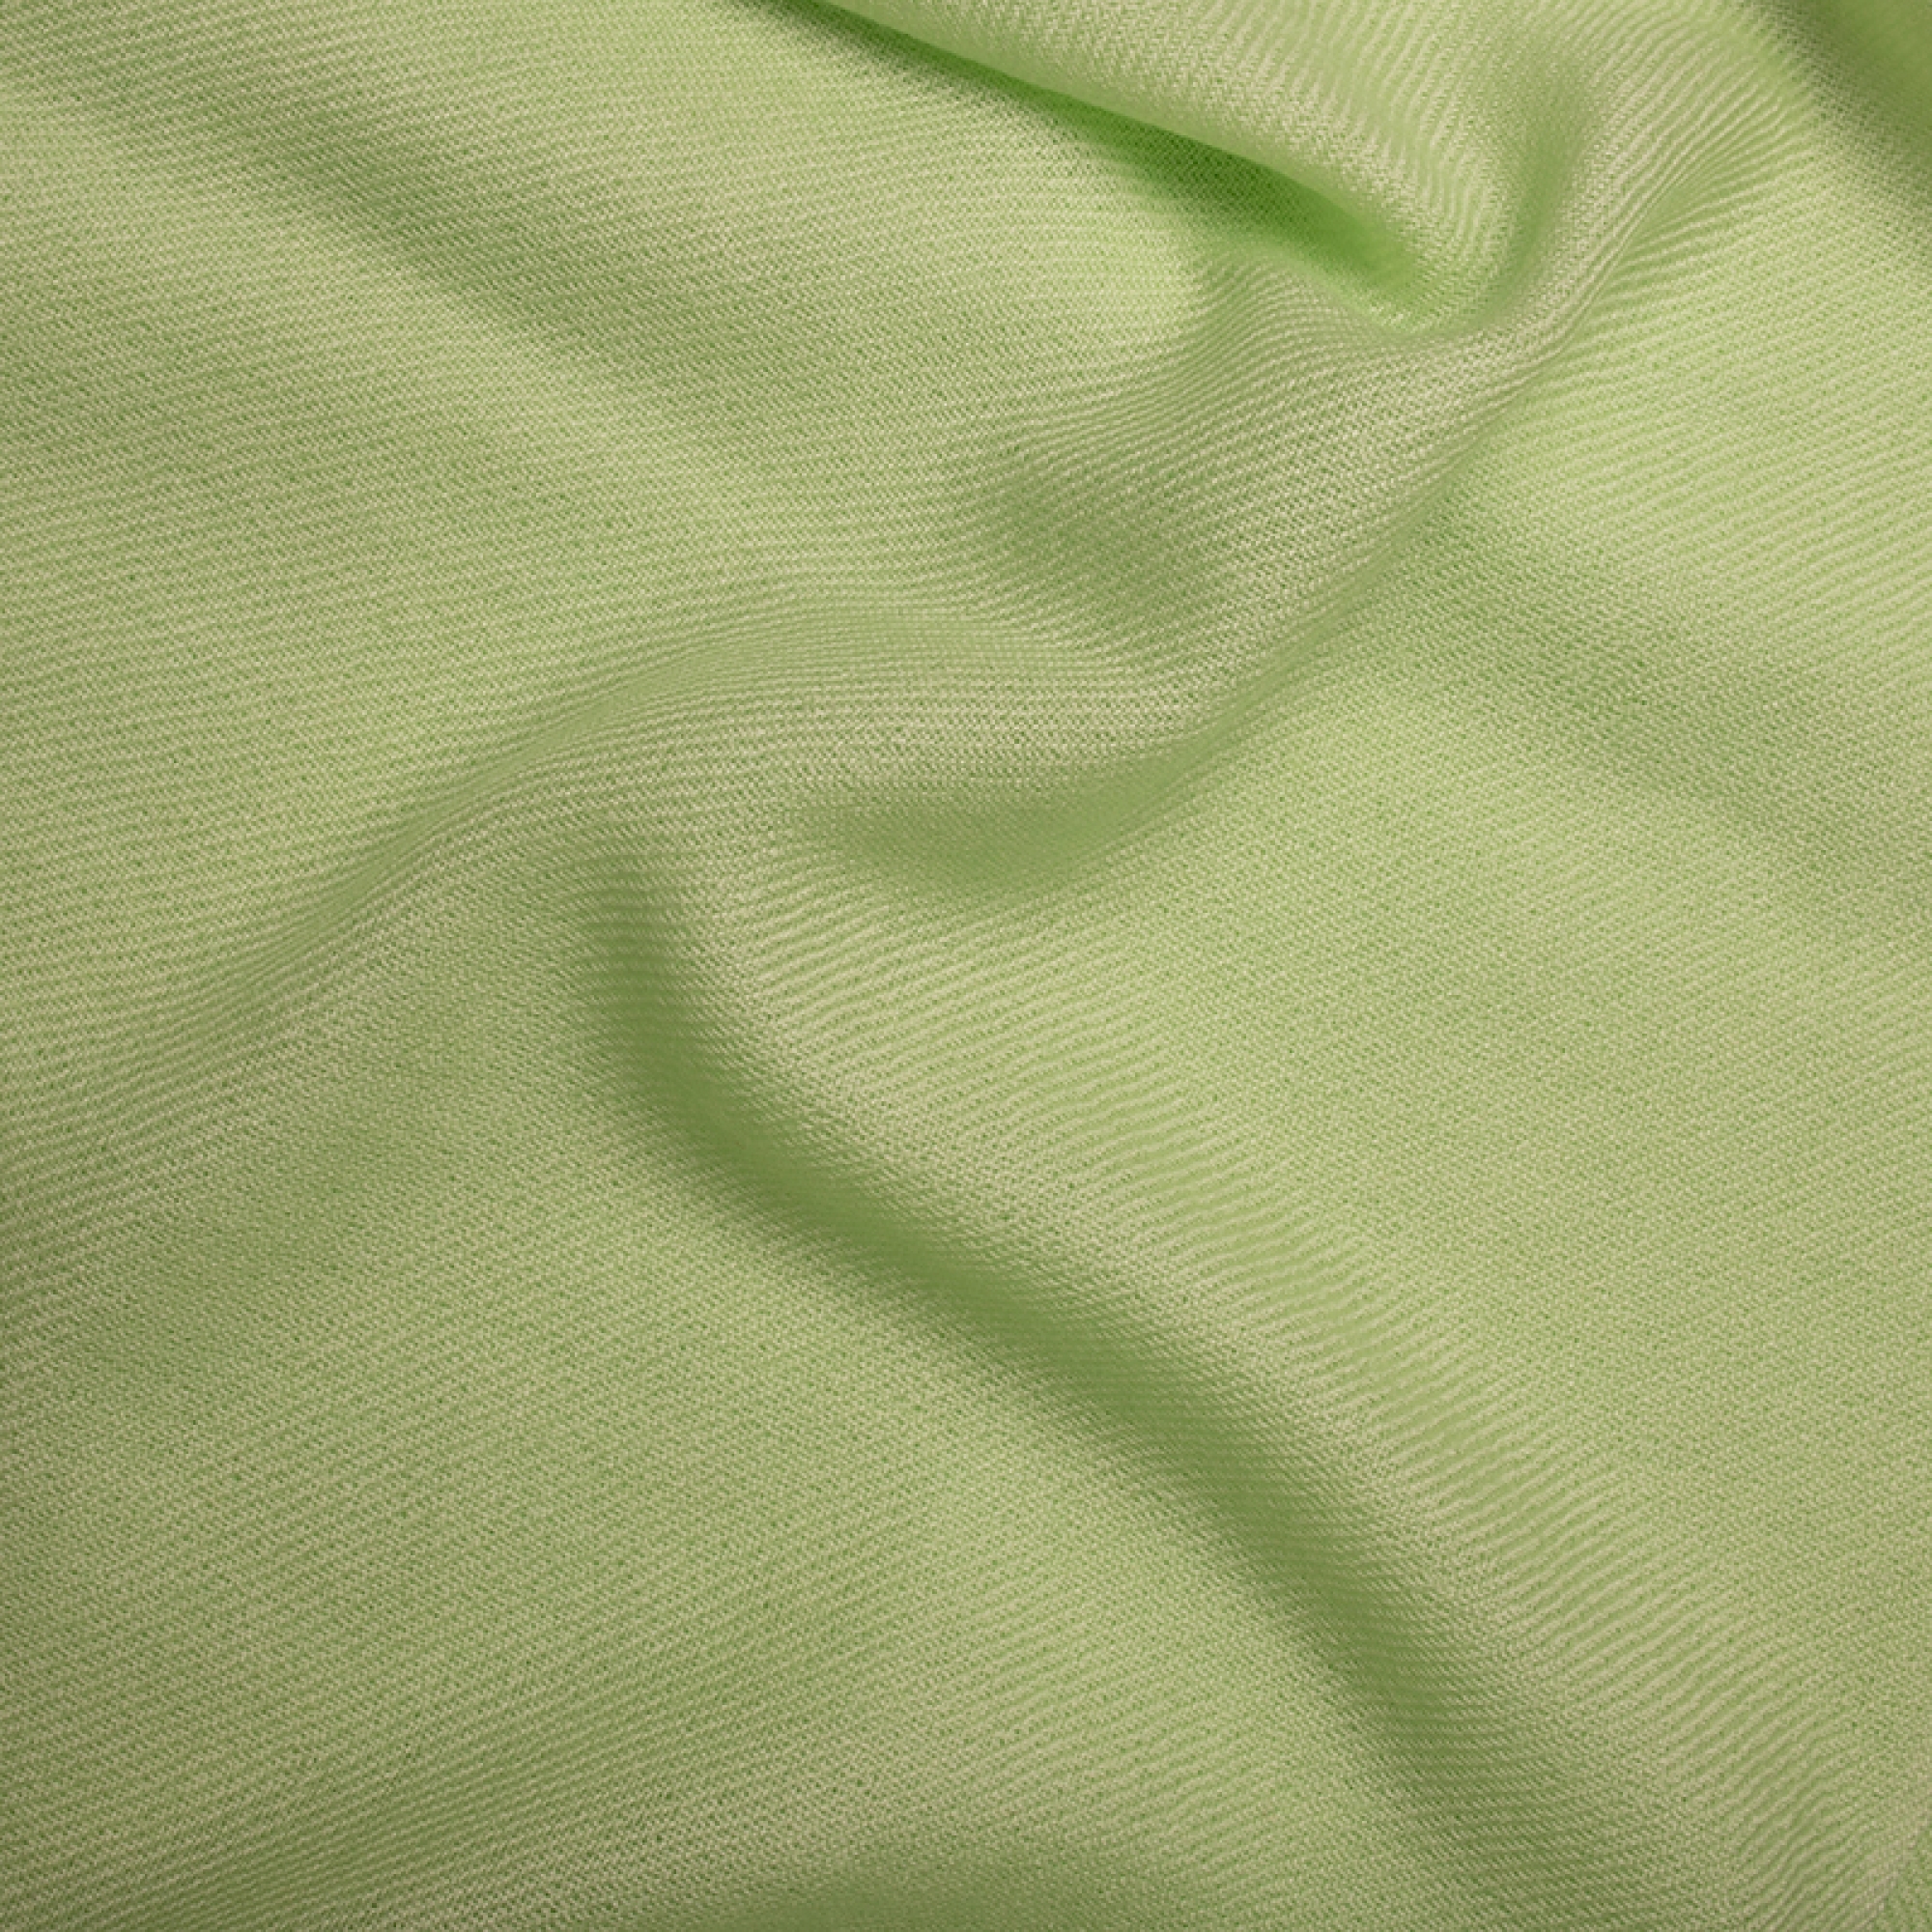 Cashmere accessories cocooning toodoo plain l 220 x 220 lime green 220x220cm